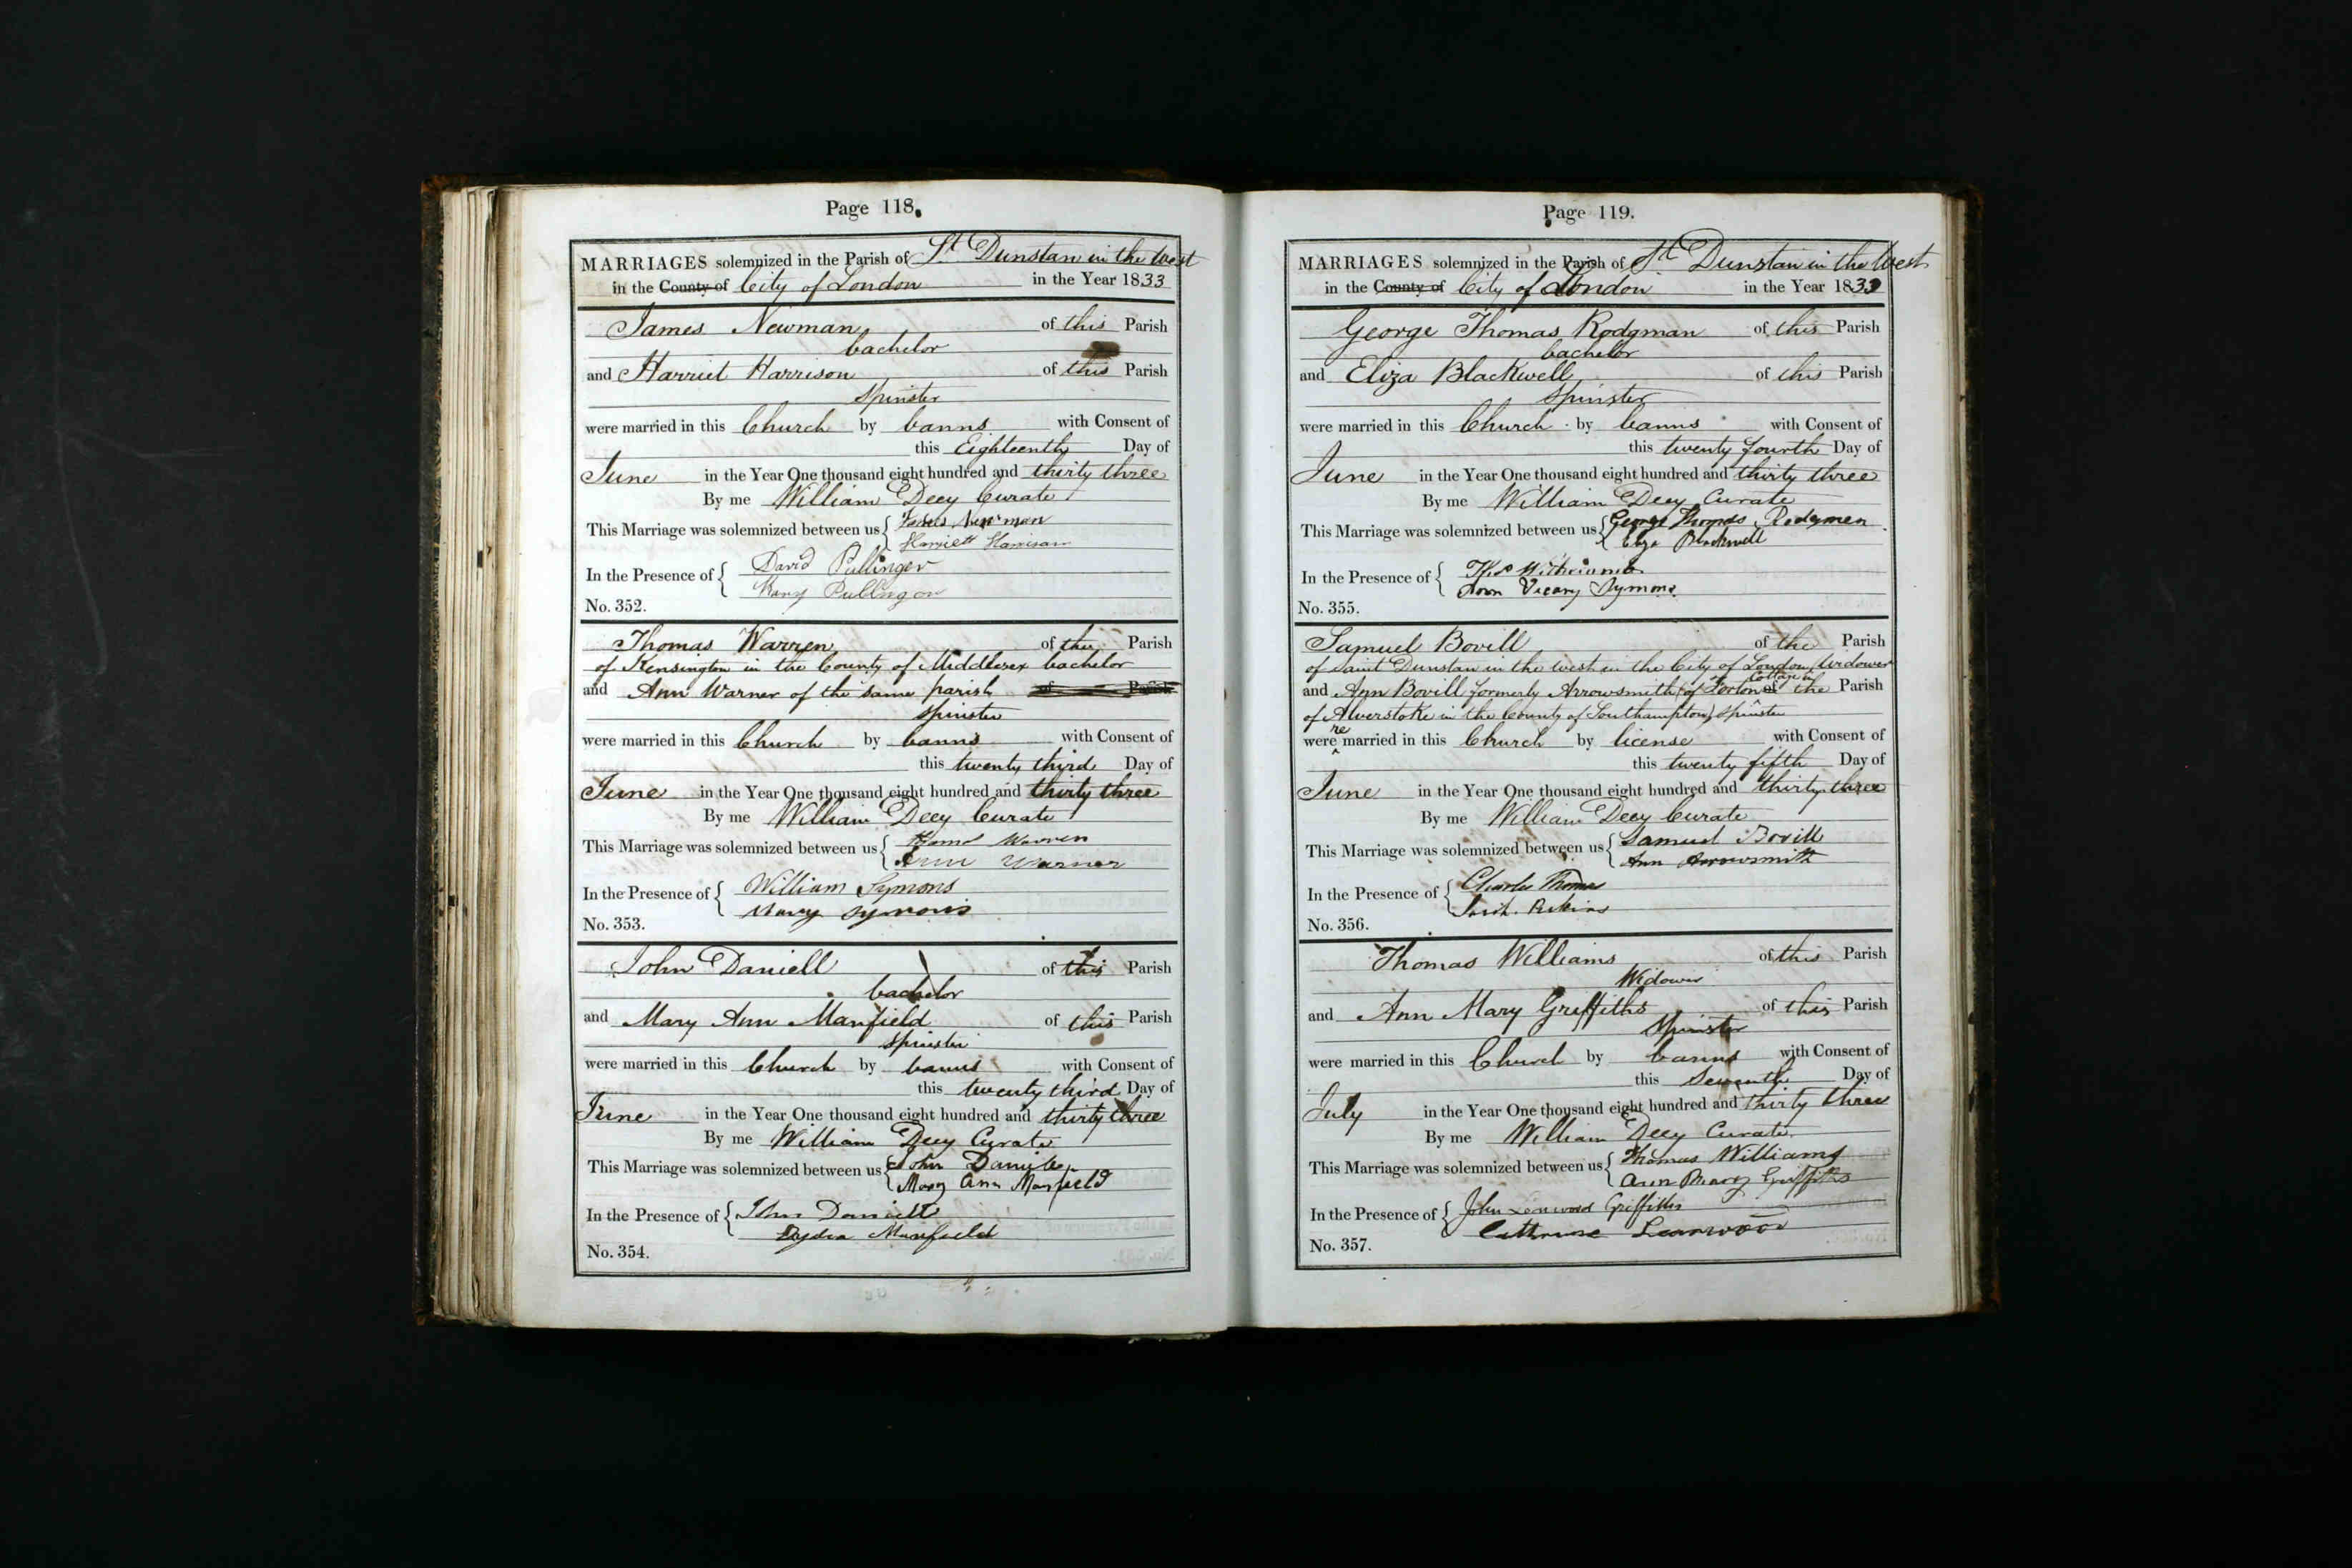 1833 marriage of Mary Ann Manfield to John Daniell